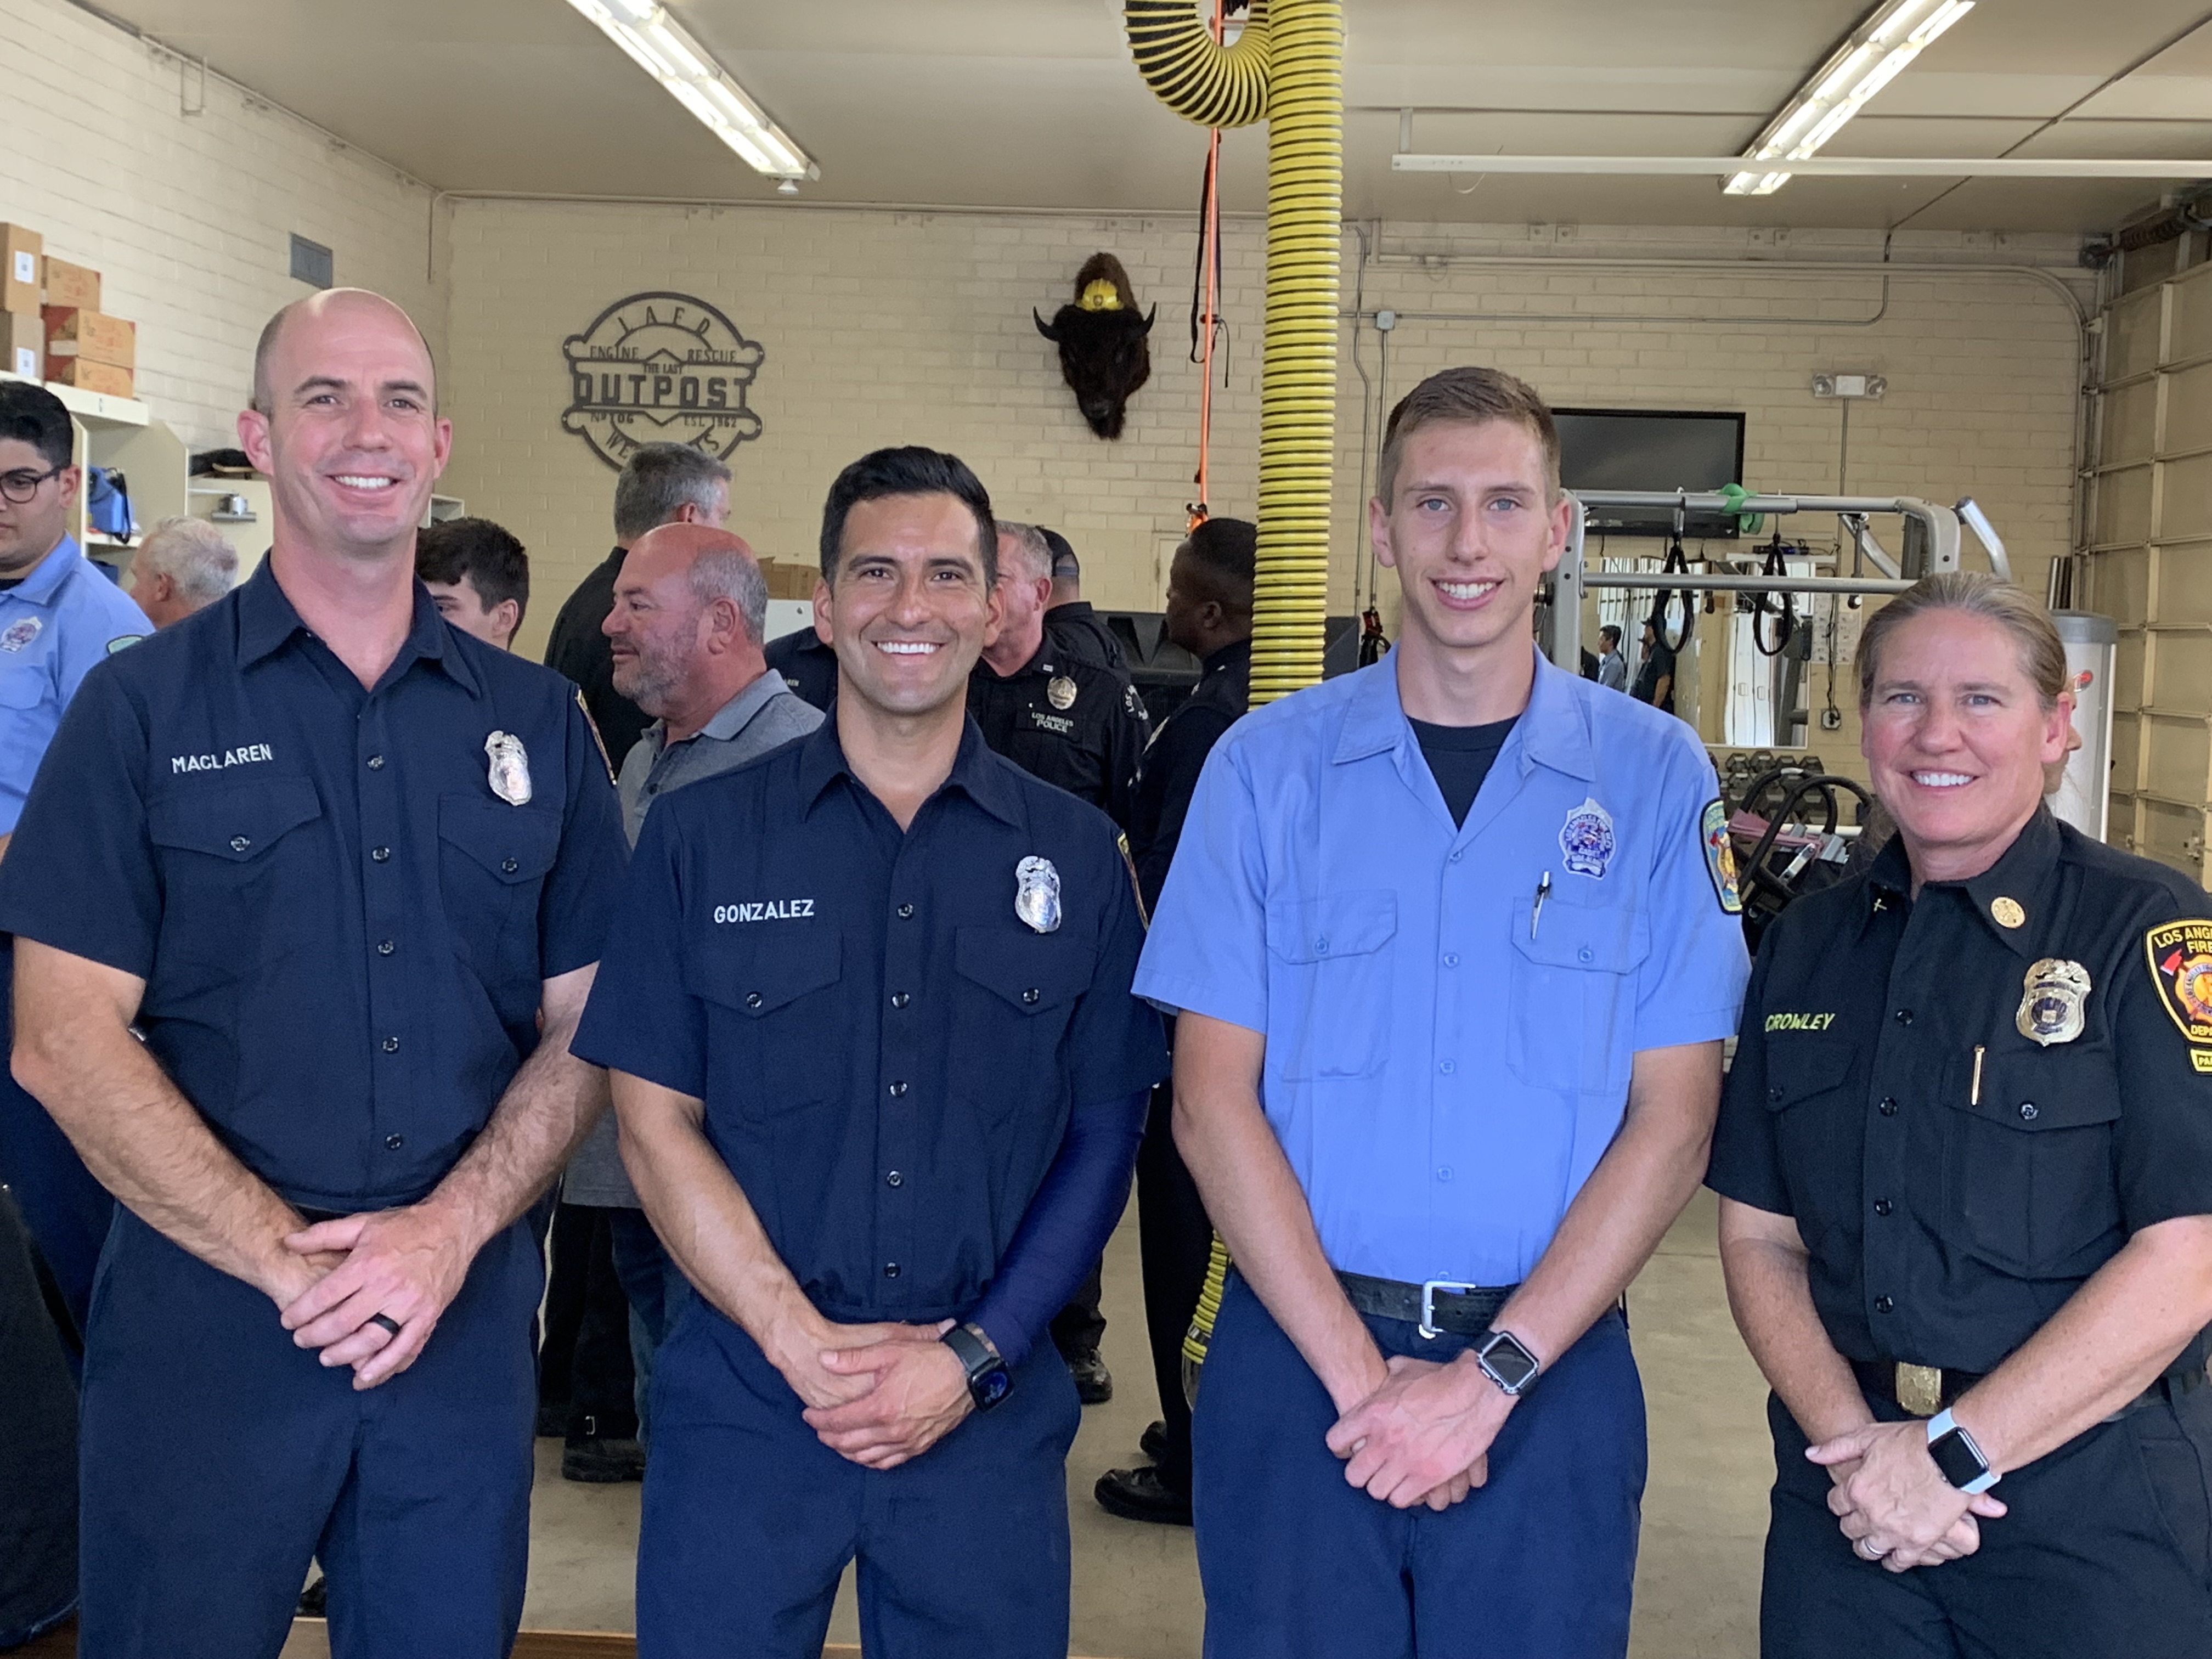 LAFD firefighters pictured with Fire Chief Crowley